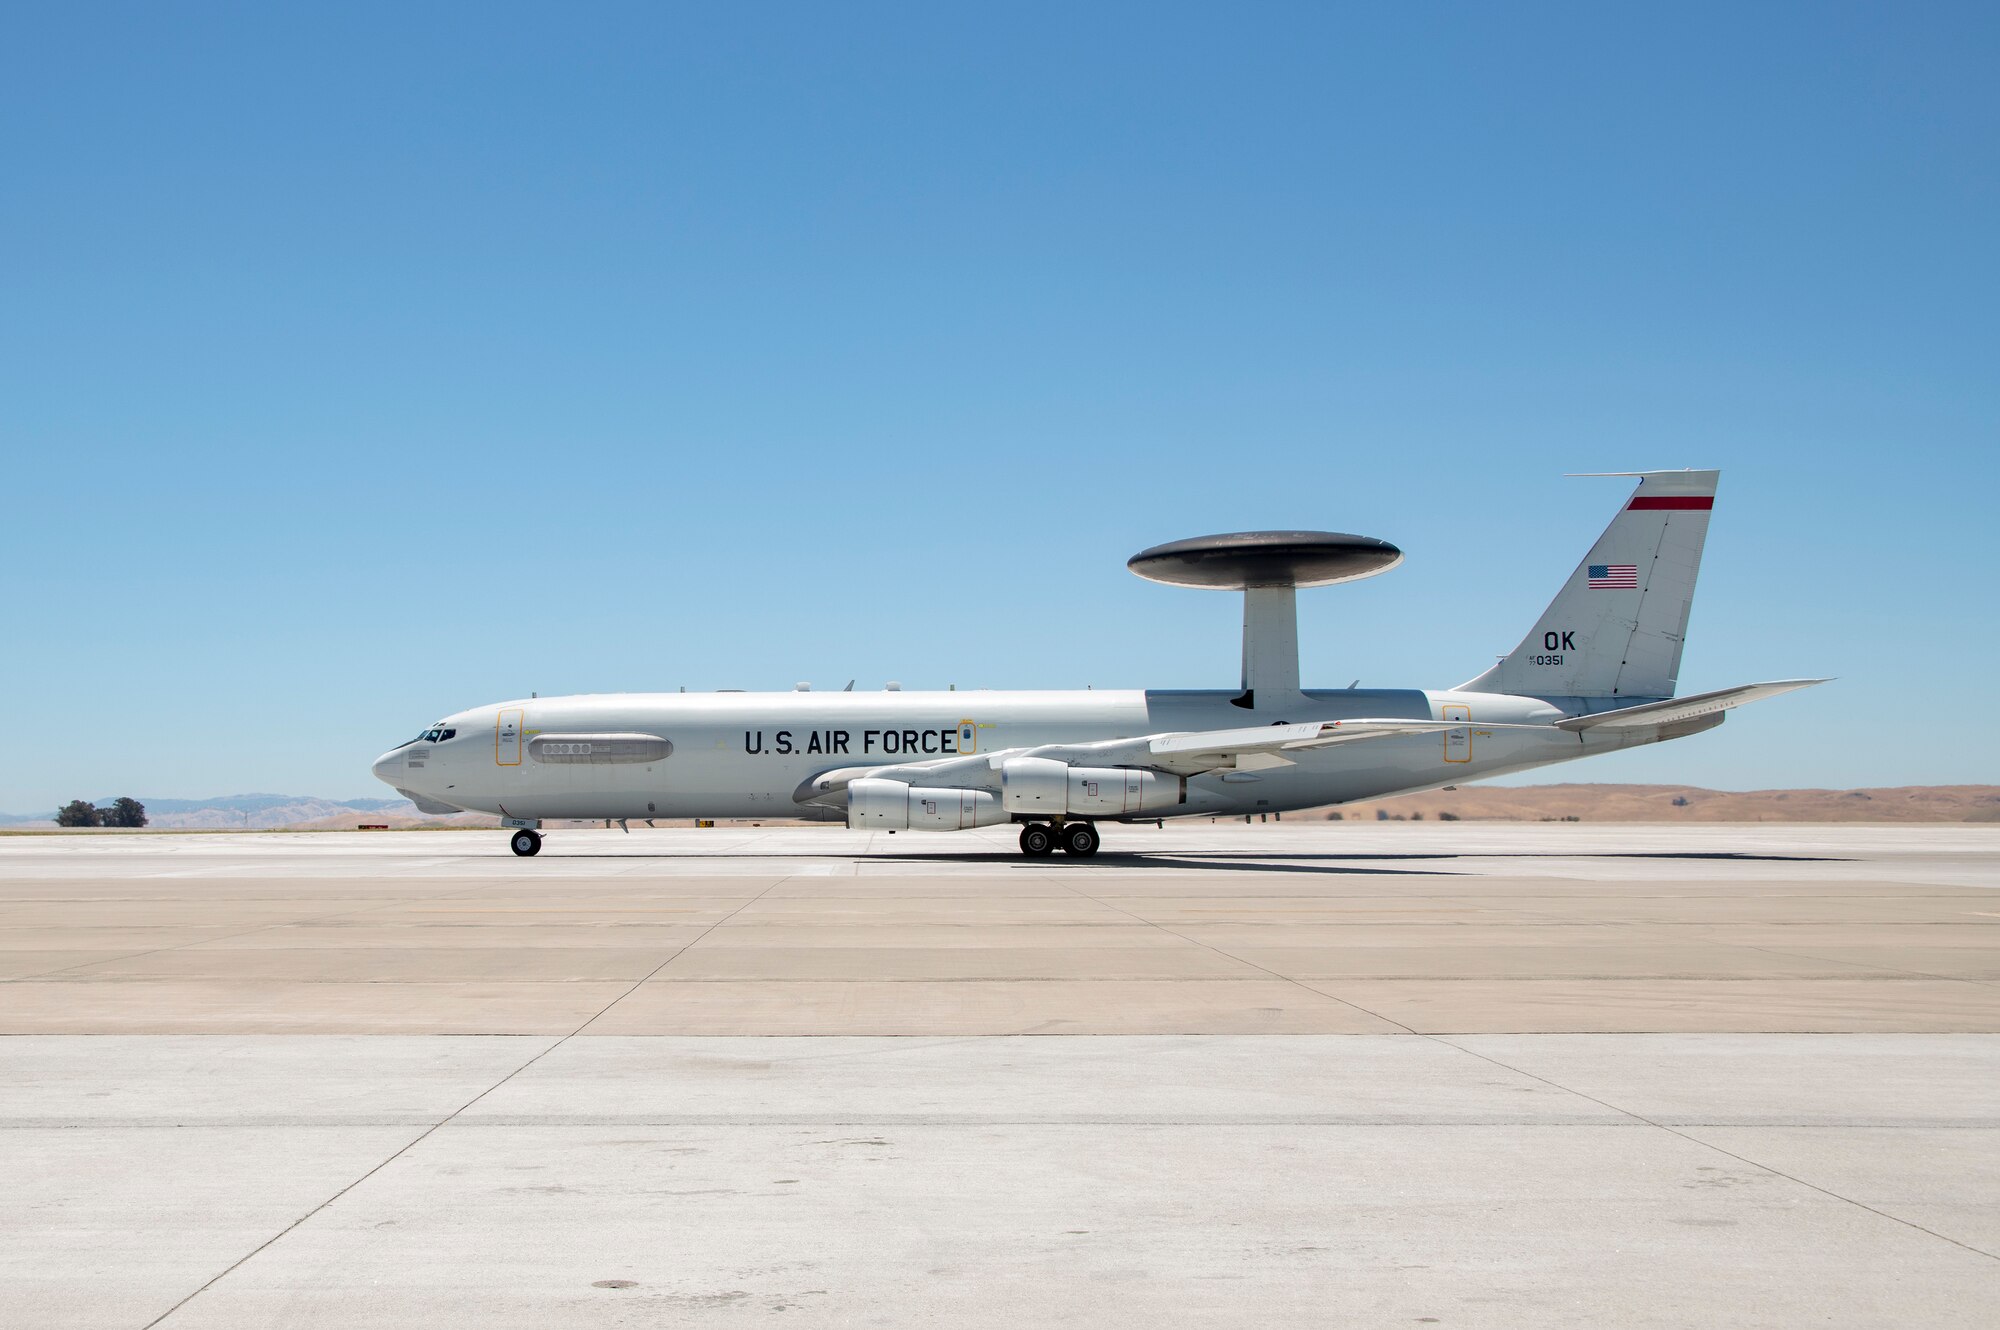 An E-3 Sentry Airborne Warning and Control System aircraft departs July 11, 2019, at Travis Air Force Base, California. The aircraft is equipped with a 30-foot-wide radar subsystem that permits surveillance up to the Earth's stratosphere and is assigned to Tinker Air Force Base, Oklahoma. (U.S. Air Force photo by Heide Couch)